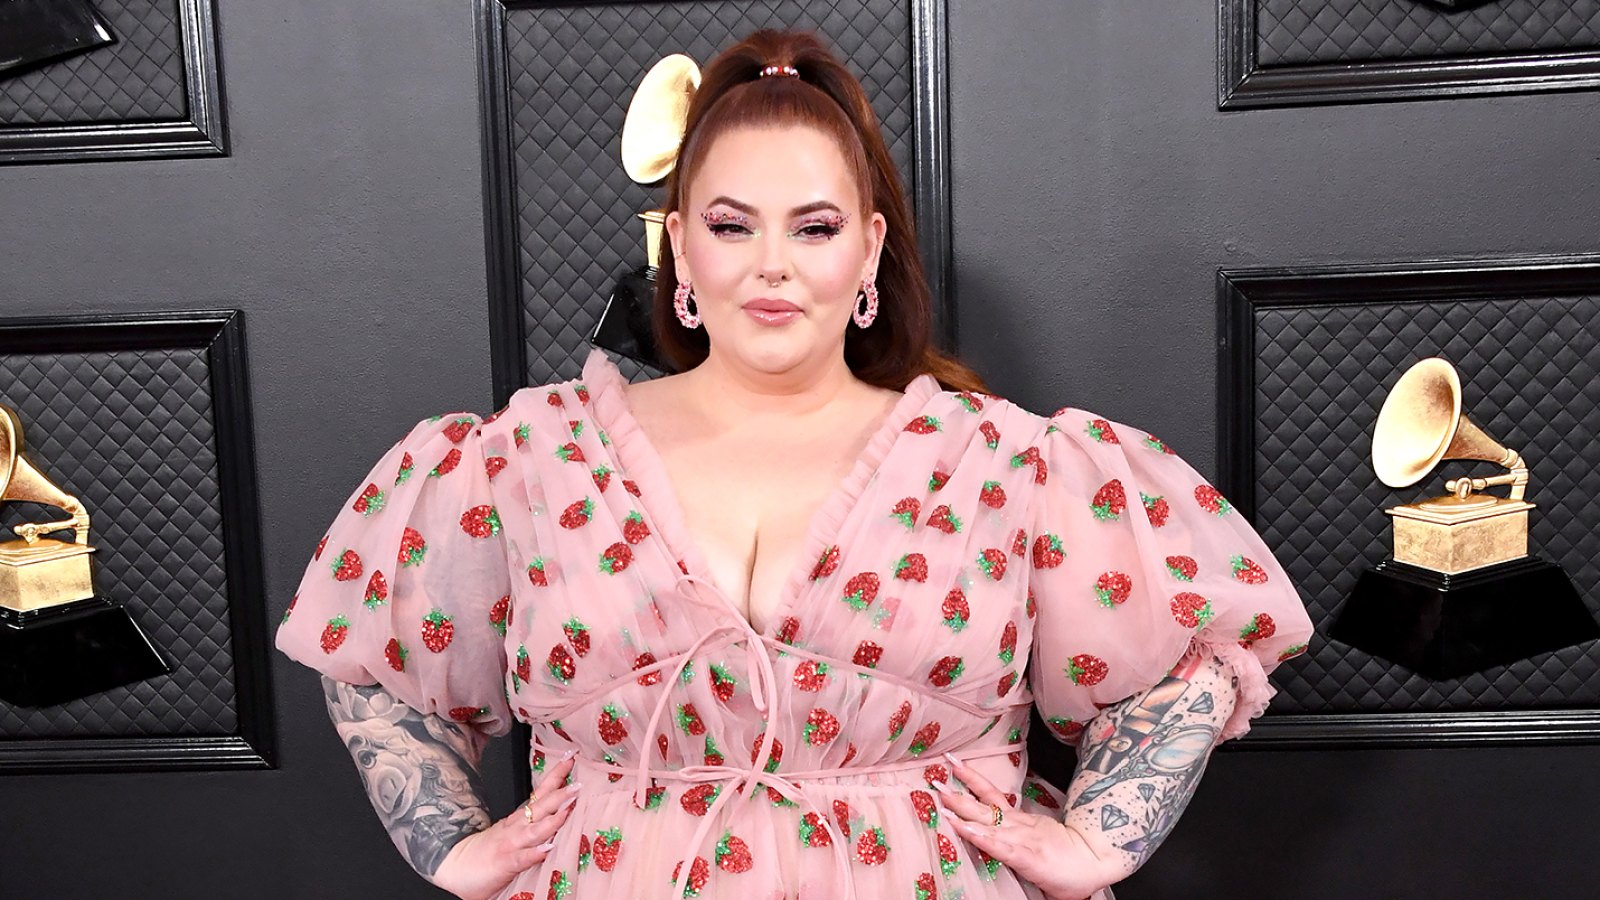 Tess Holliday Says Mental Health Is Fragile After Fatphobic Messages